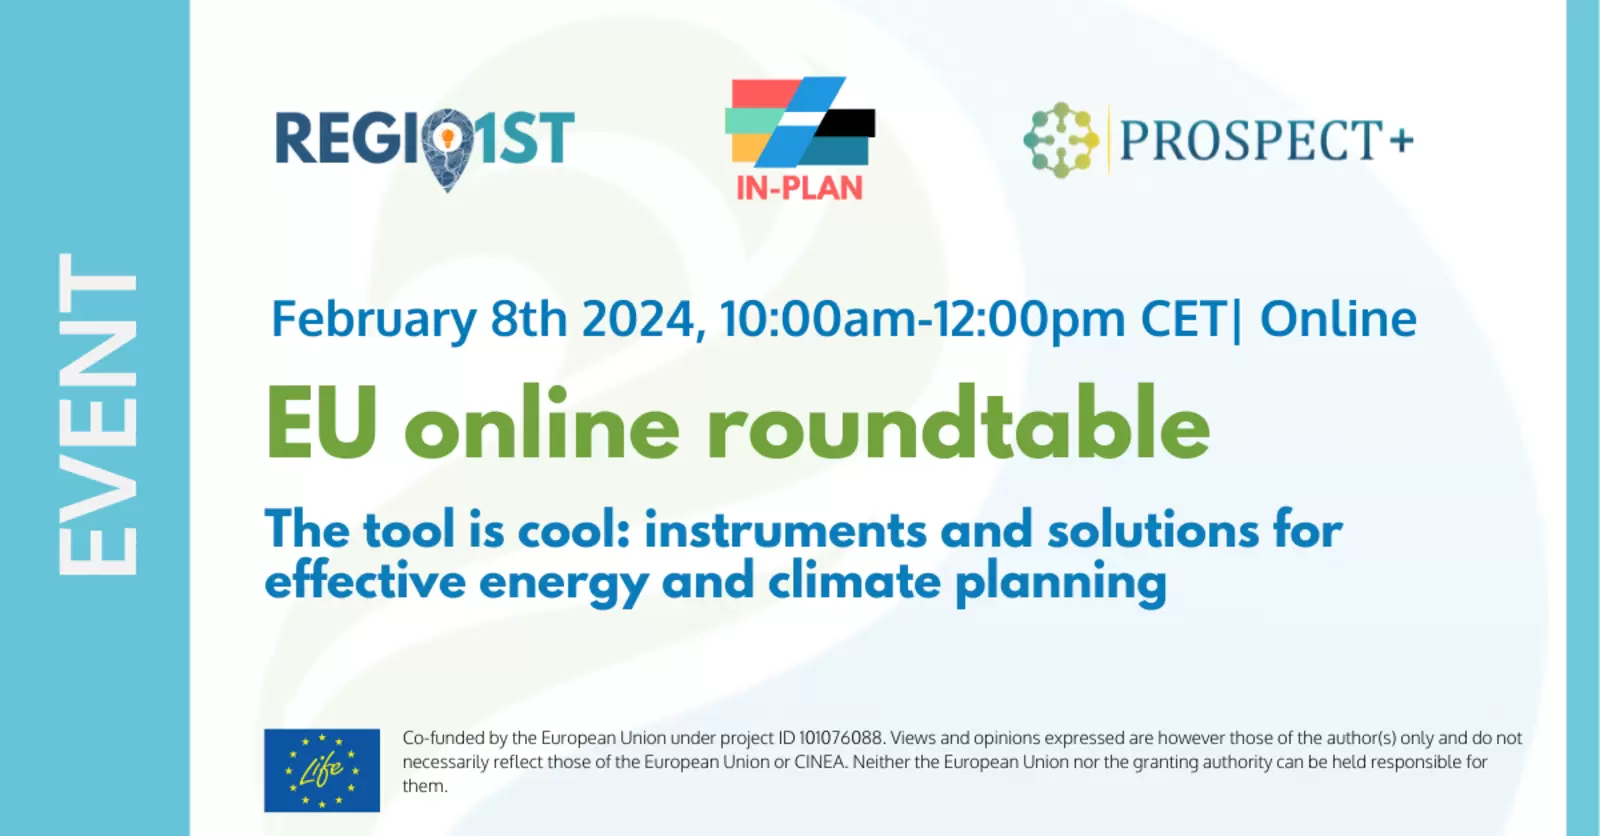 The tool is cool: instruments and solutions for effective energy and climate planning – EU online roundtable